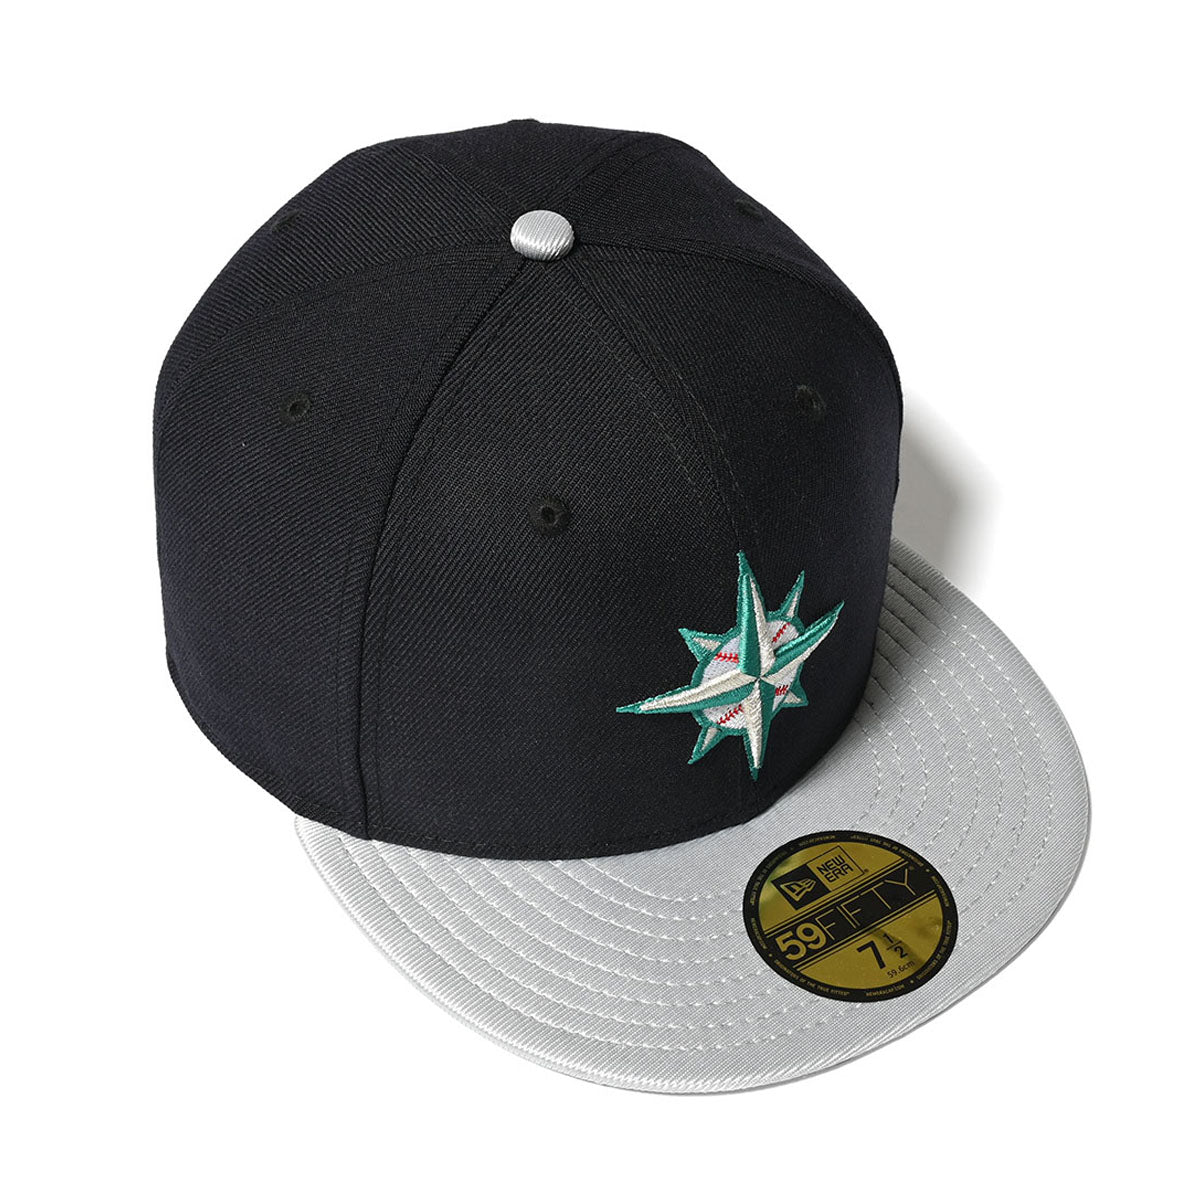 NEW ERA Seatles Mariners - 59FIFTY 1999-2000 OLD AUTH ALT【14339799】